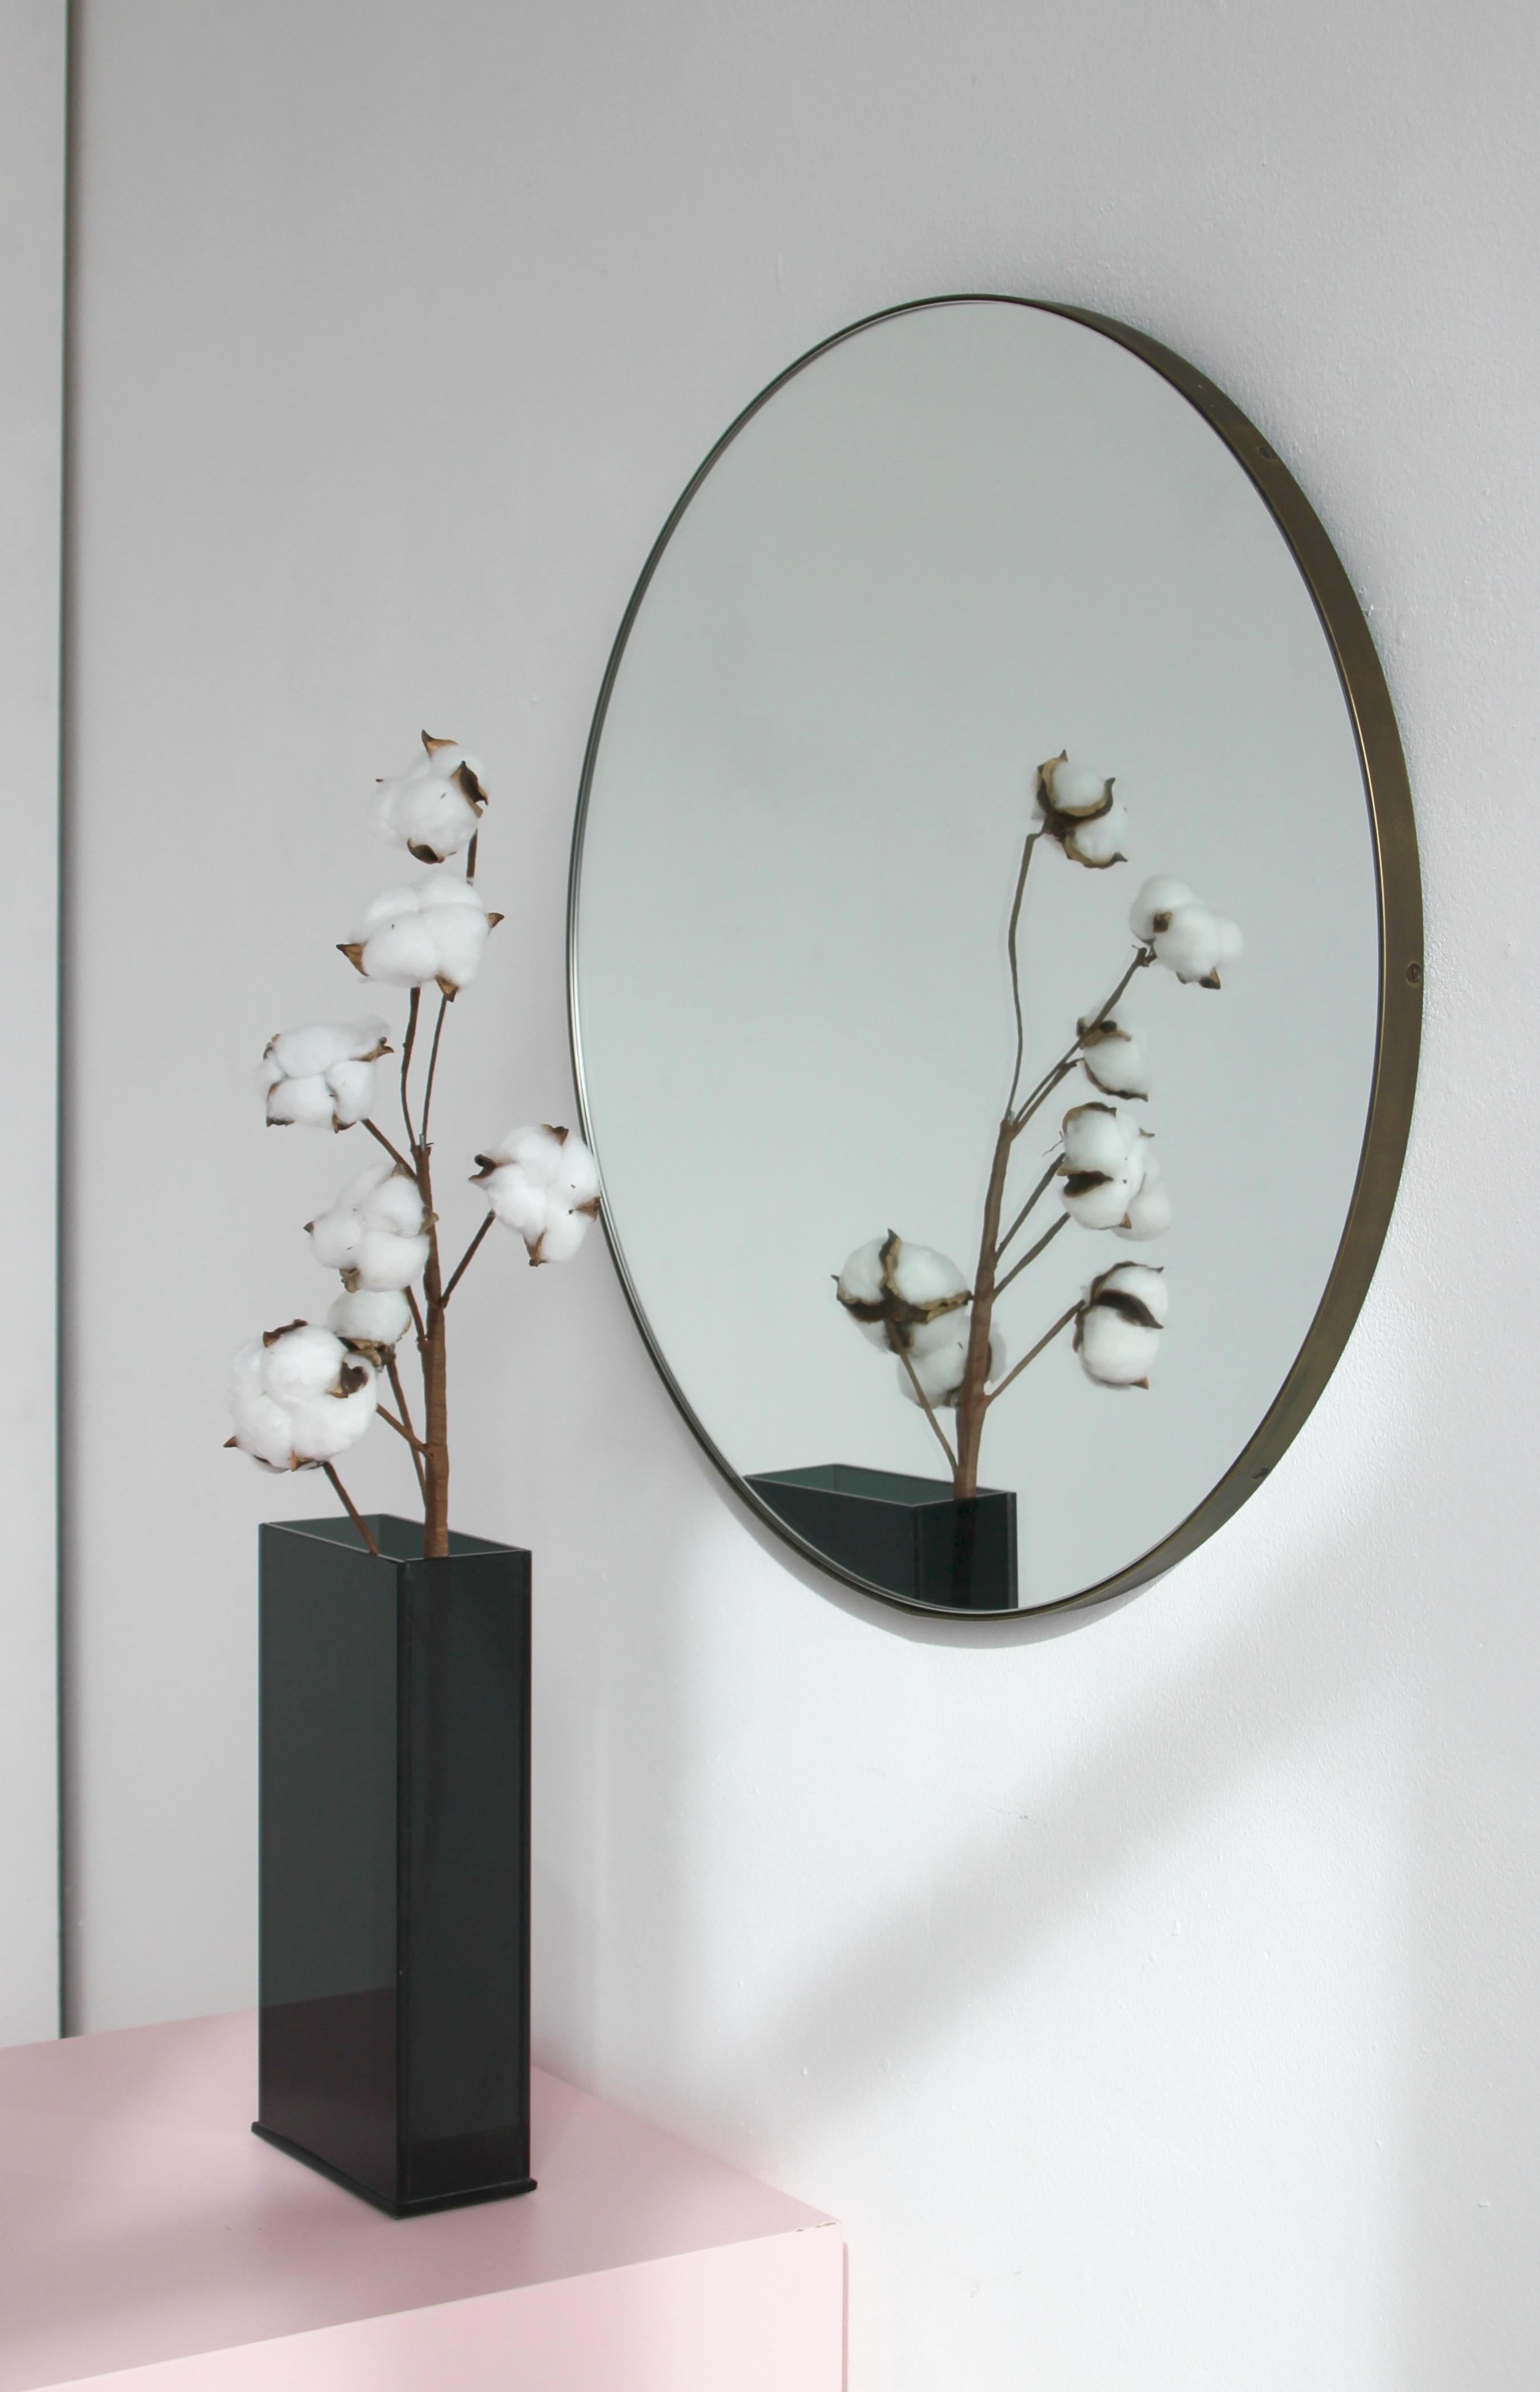 Minimalist Orbis™ round mirror with a solid brass frame with a bronze patina finish. Designed and handcrafted in London, UK.

Our mirrors are designed with an integrated French cleat (split batten) system that ensures the mirror is securely mounted